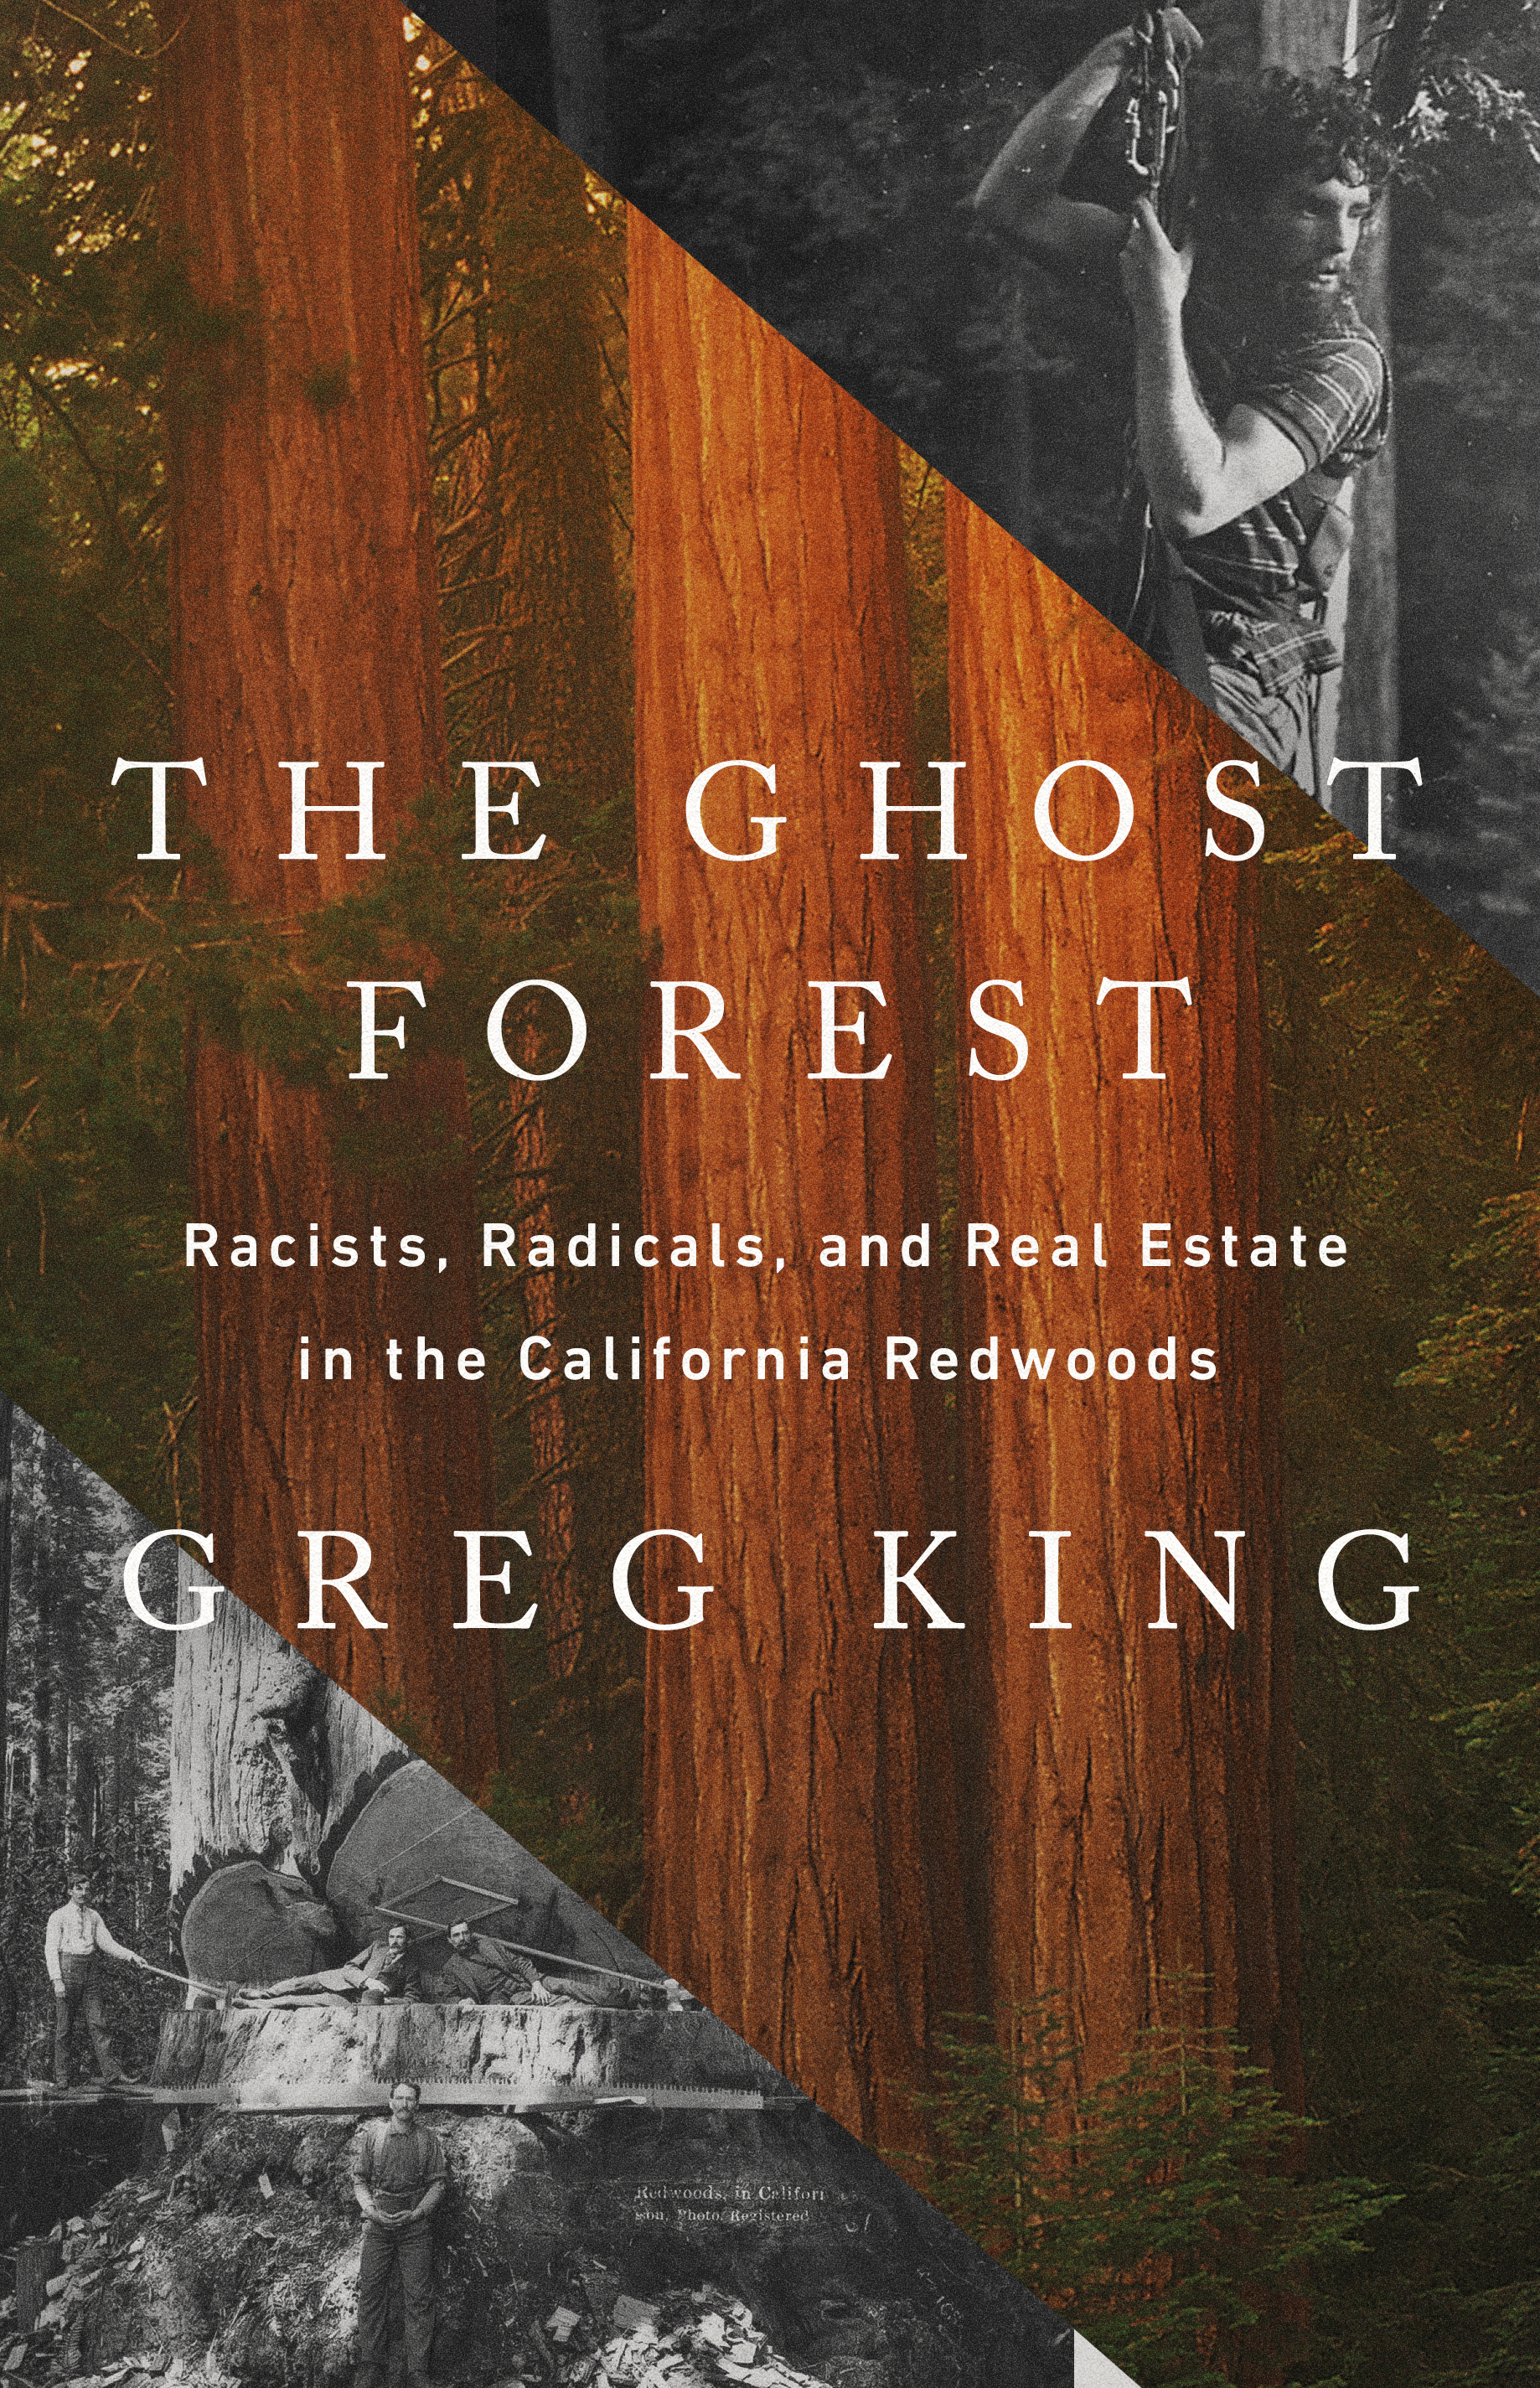 The Ghost Forest by Greg King | Hachette Book Group